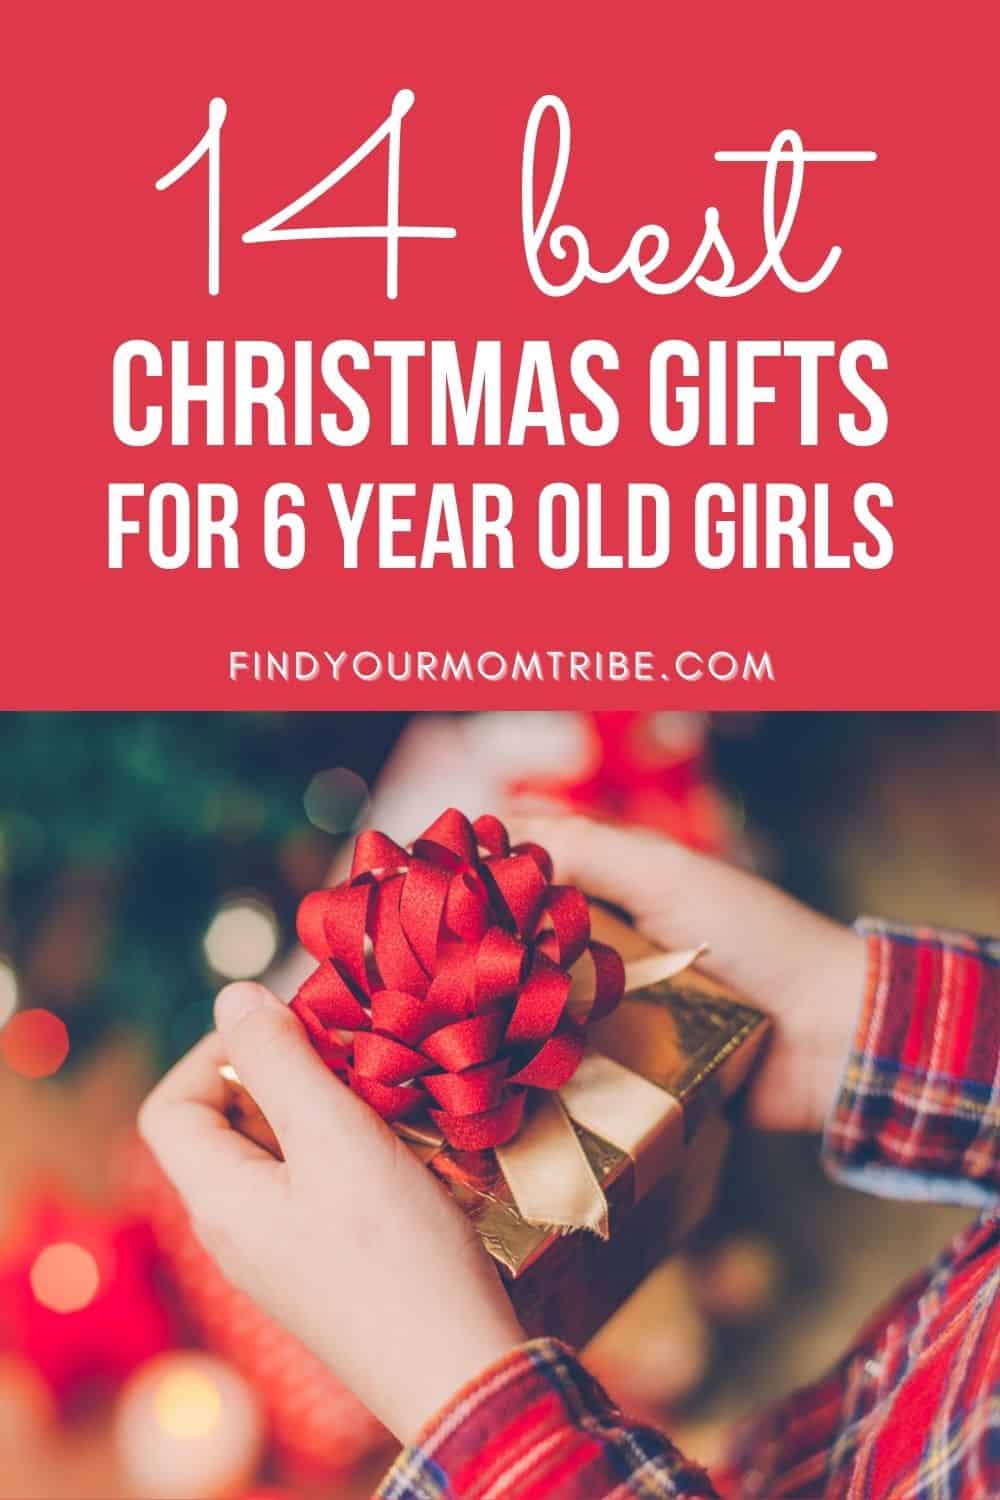 14 Best Christmas Gifts For 6 Year Old Girls in 2020